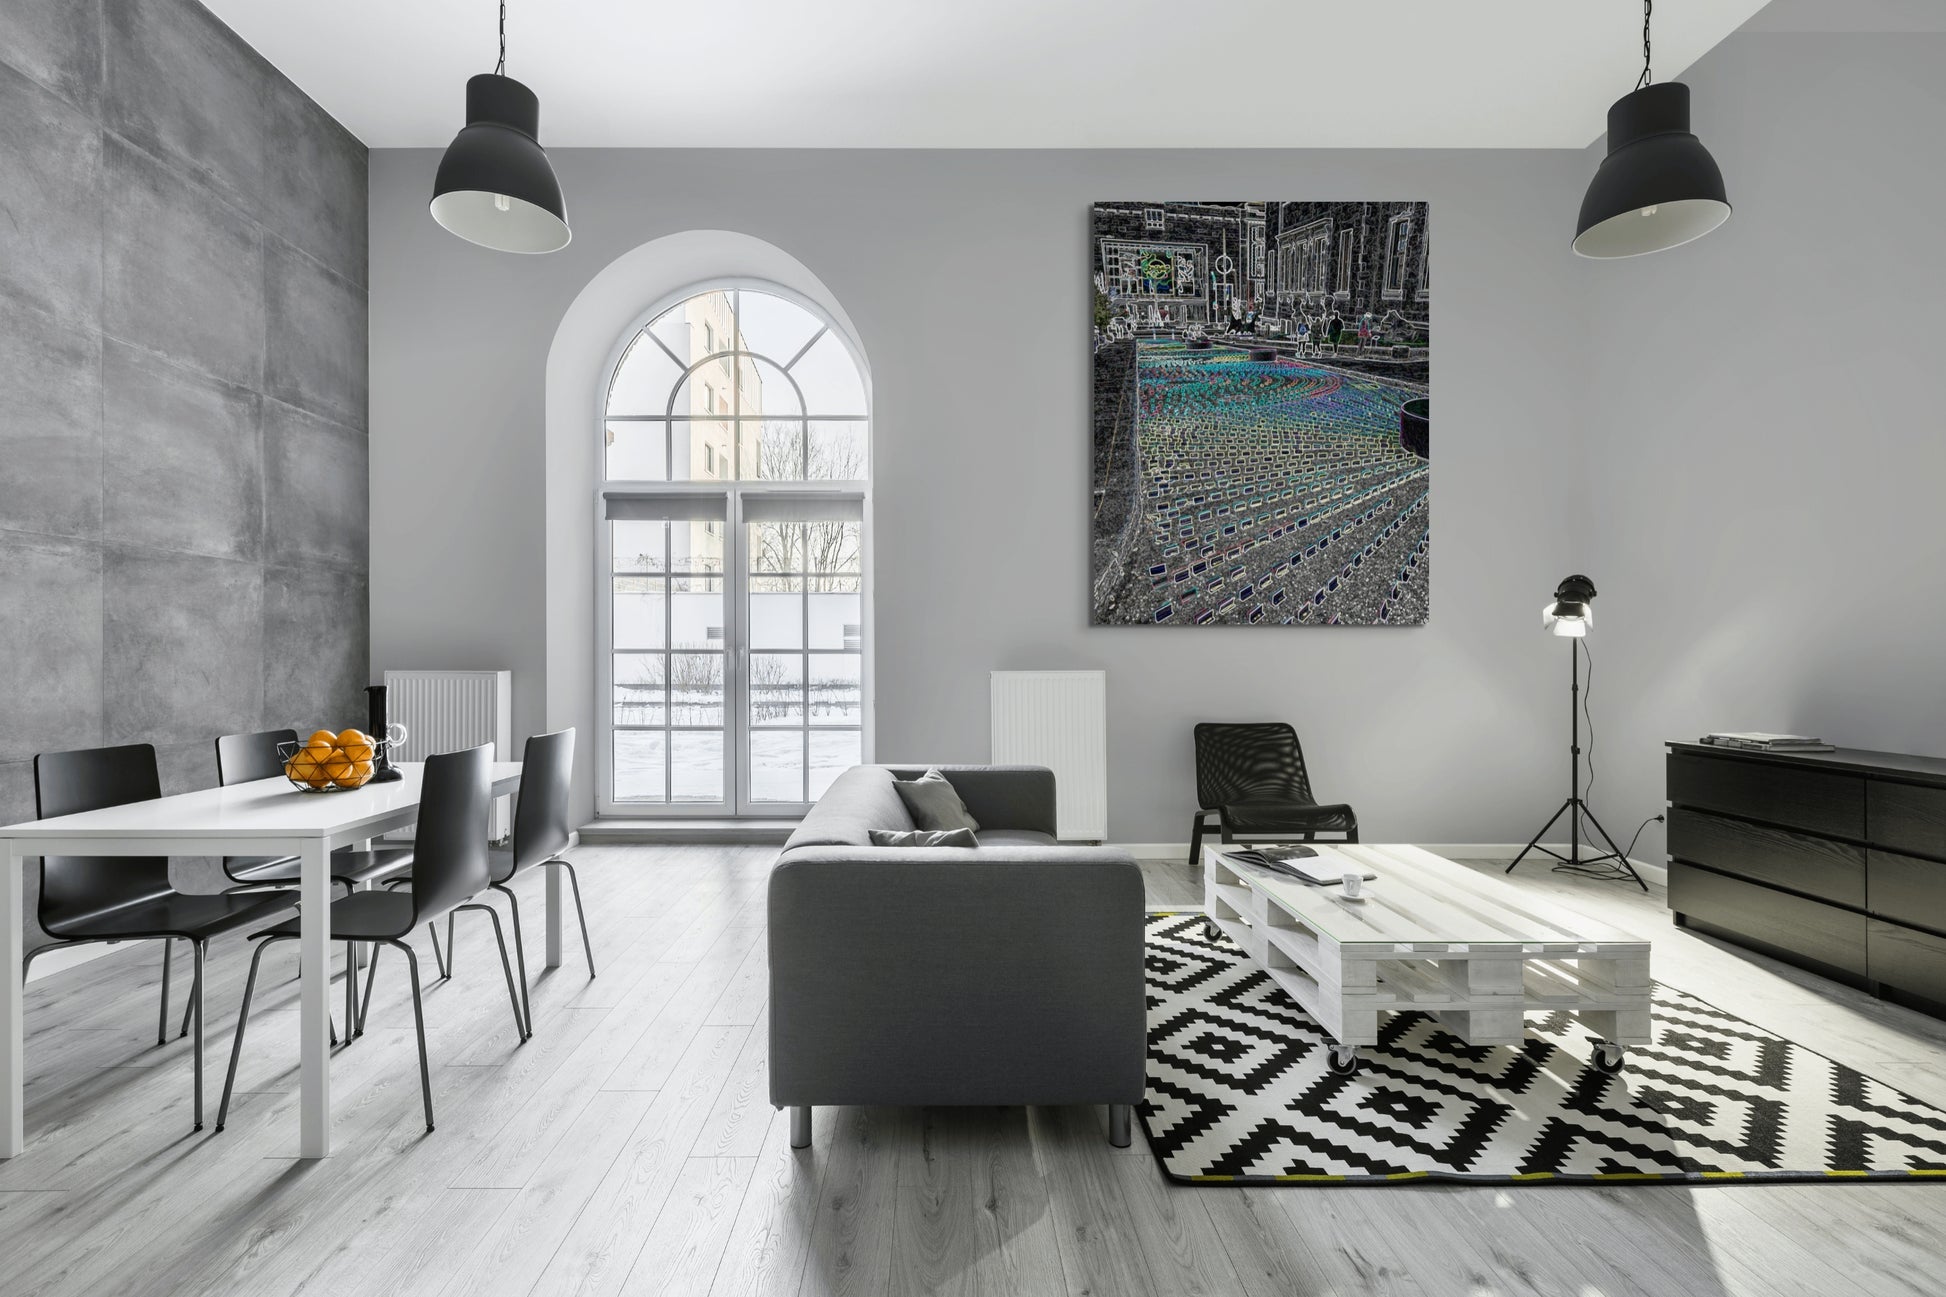 Neon Street Art Canvas Wall Art in loft style lounge room with grey walls, arch window, white table with four chairs, grey lounge, black pendant lights and a floor rug